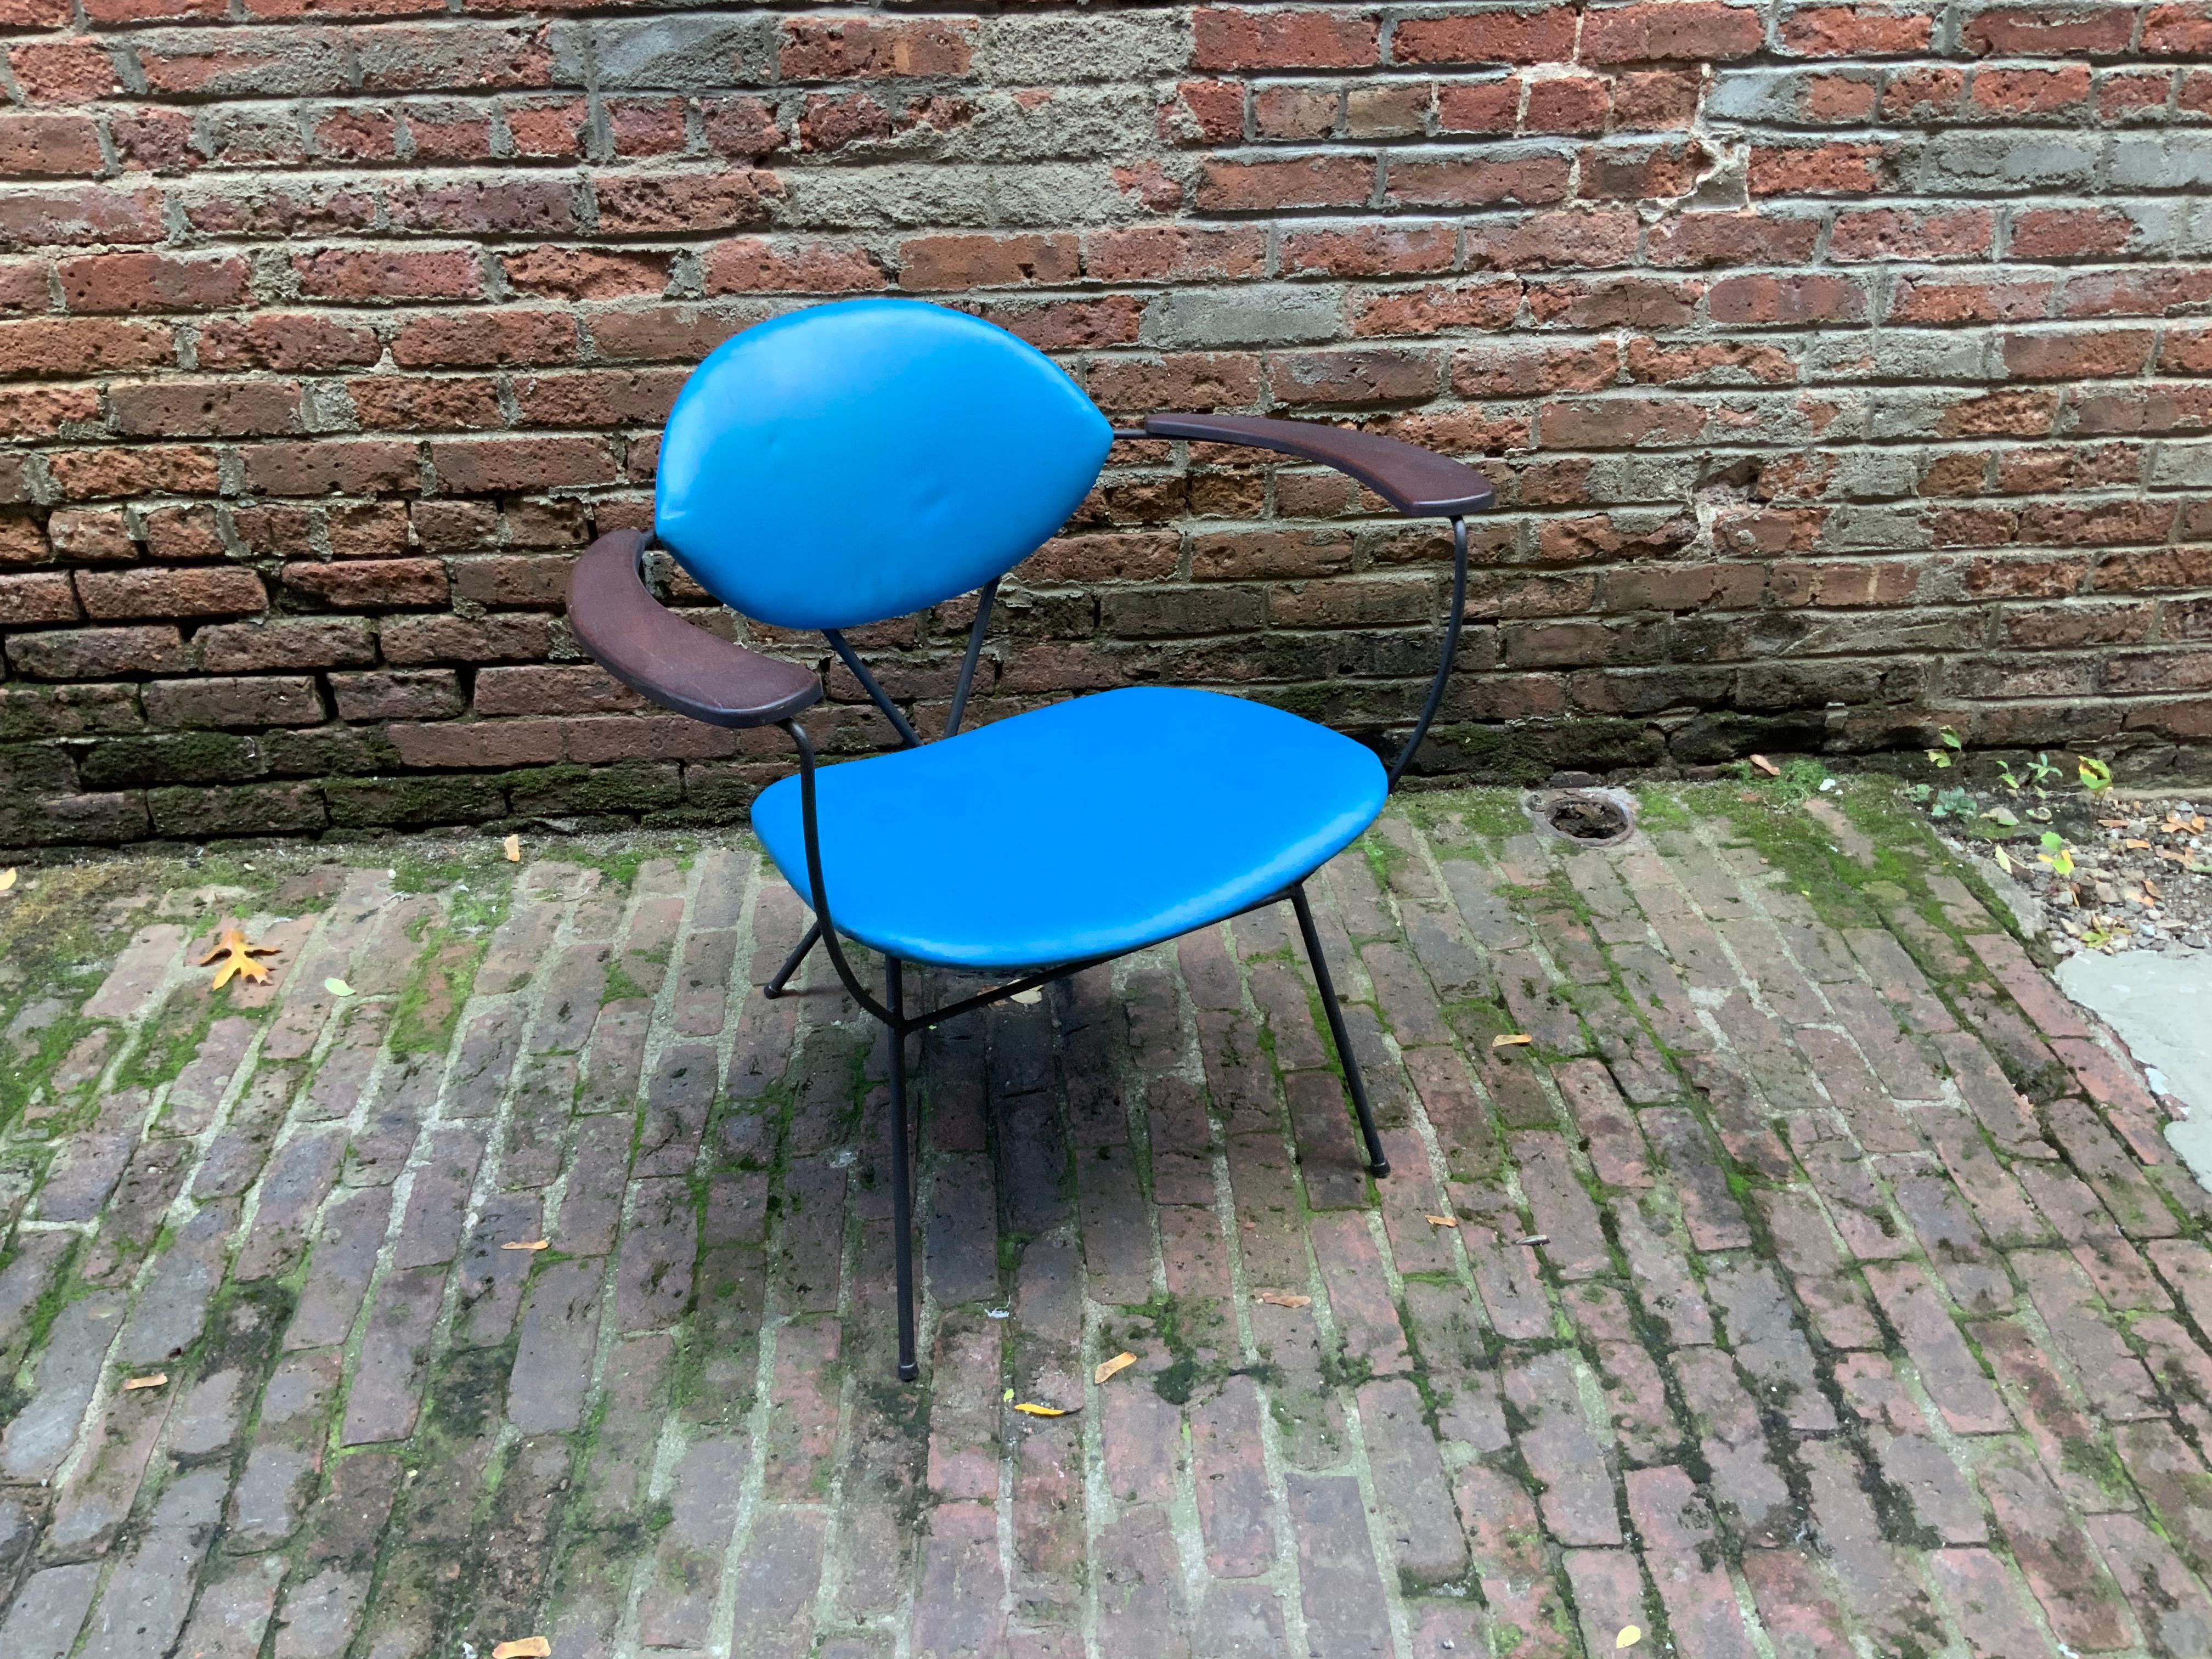 Designed by Joseph Cicchelli for Reilly-Wolff, circa 1950-1960. Original blue vinyl upholstery, wood paddle arms with an iron rod frame. Fantastic and durable Minimalist design. Very good condition.

Measures: Seat height is 17